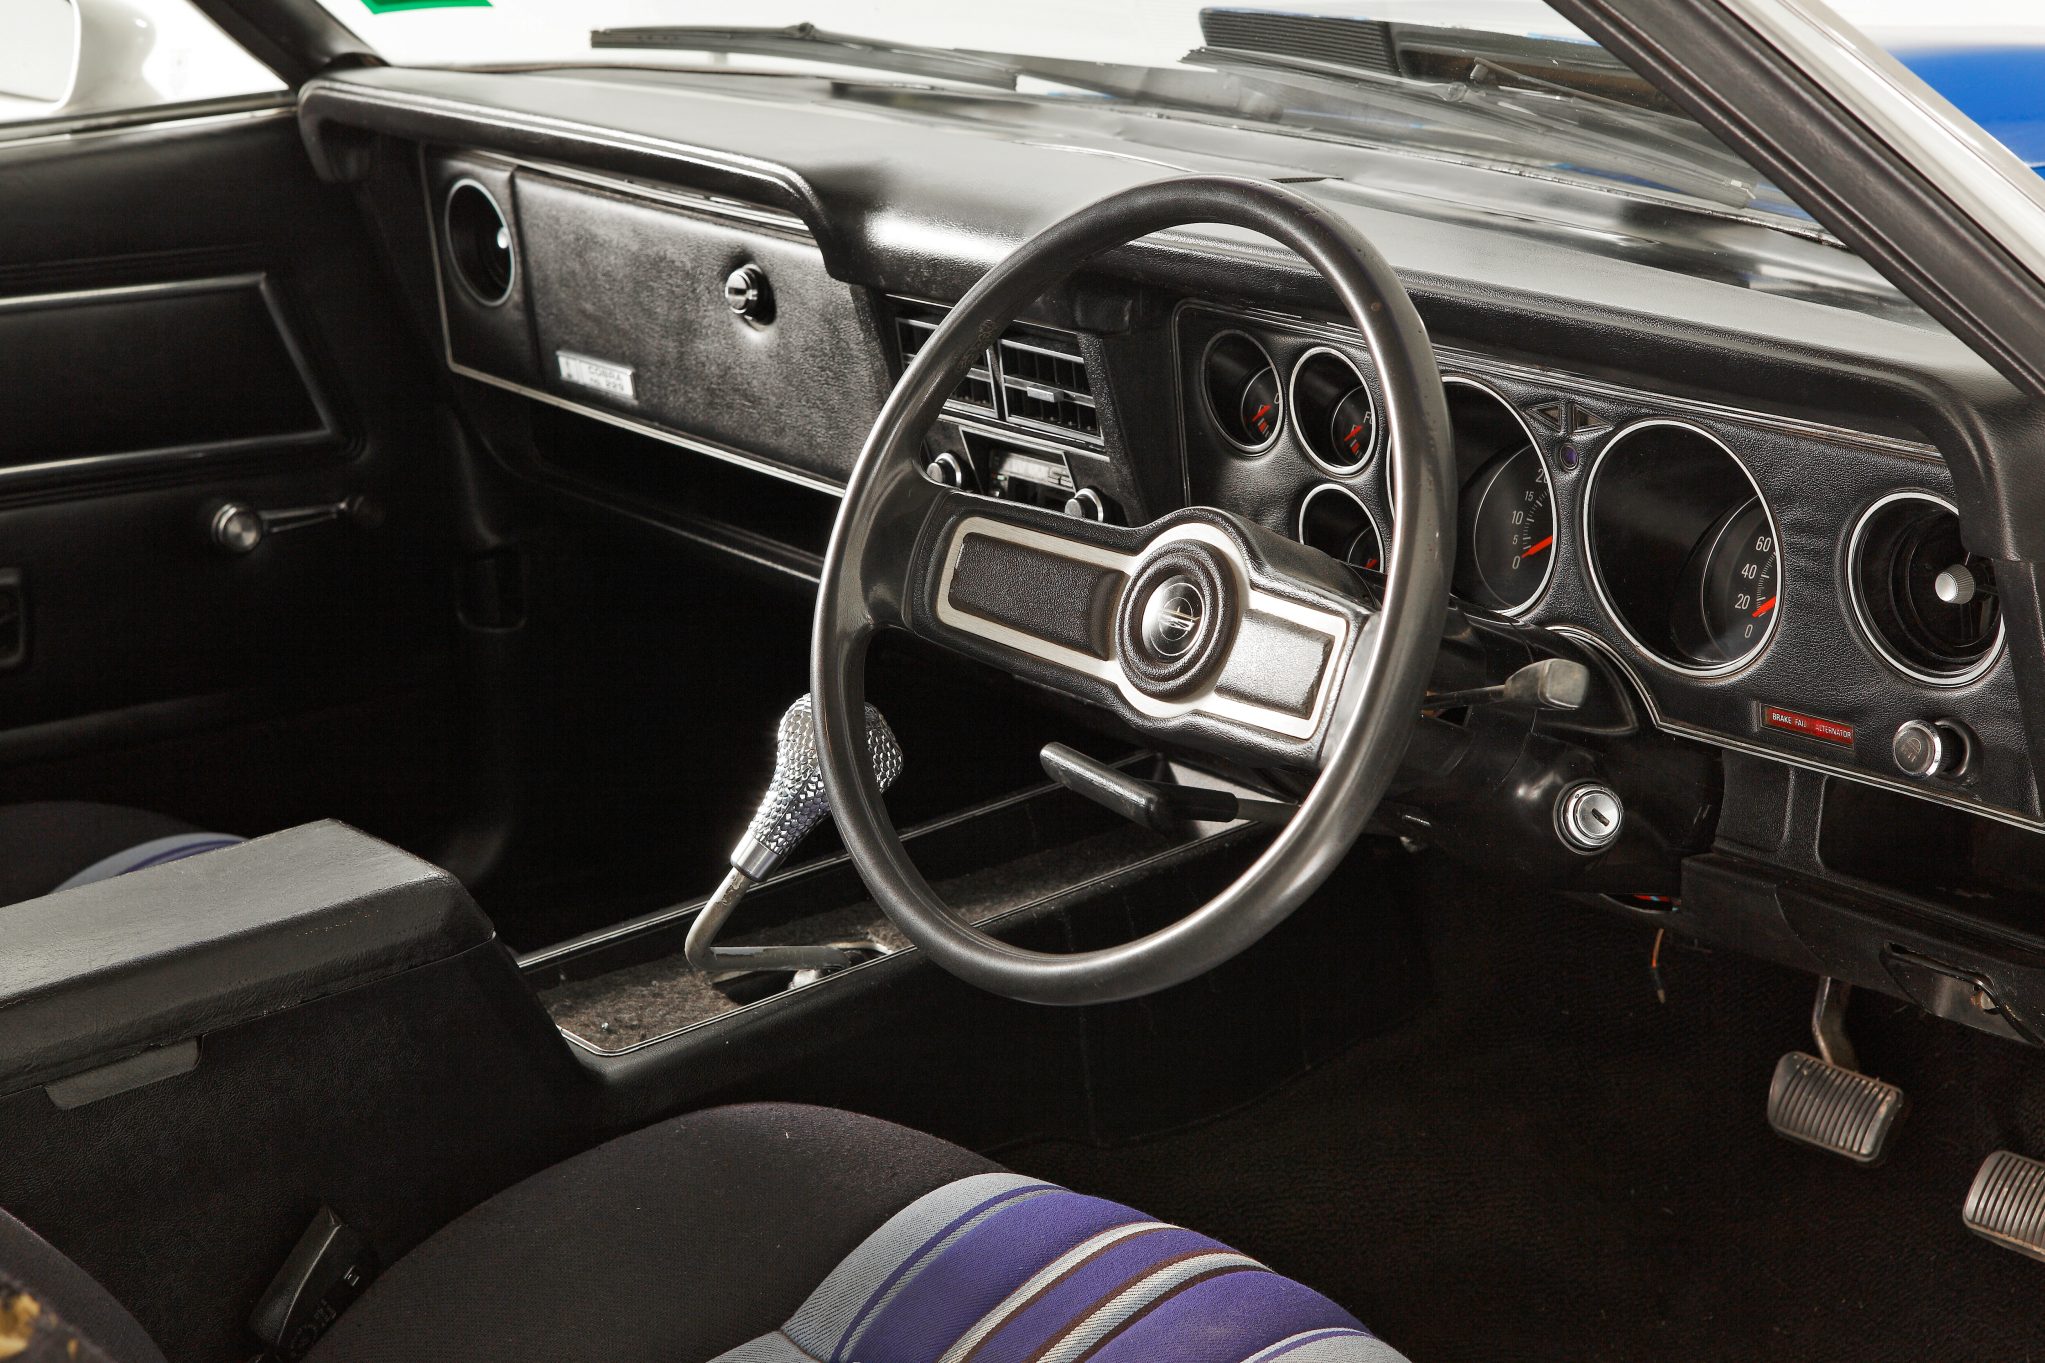 Street Machine Features Ford Falcon Xc Interior